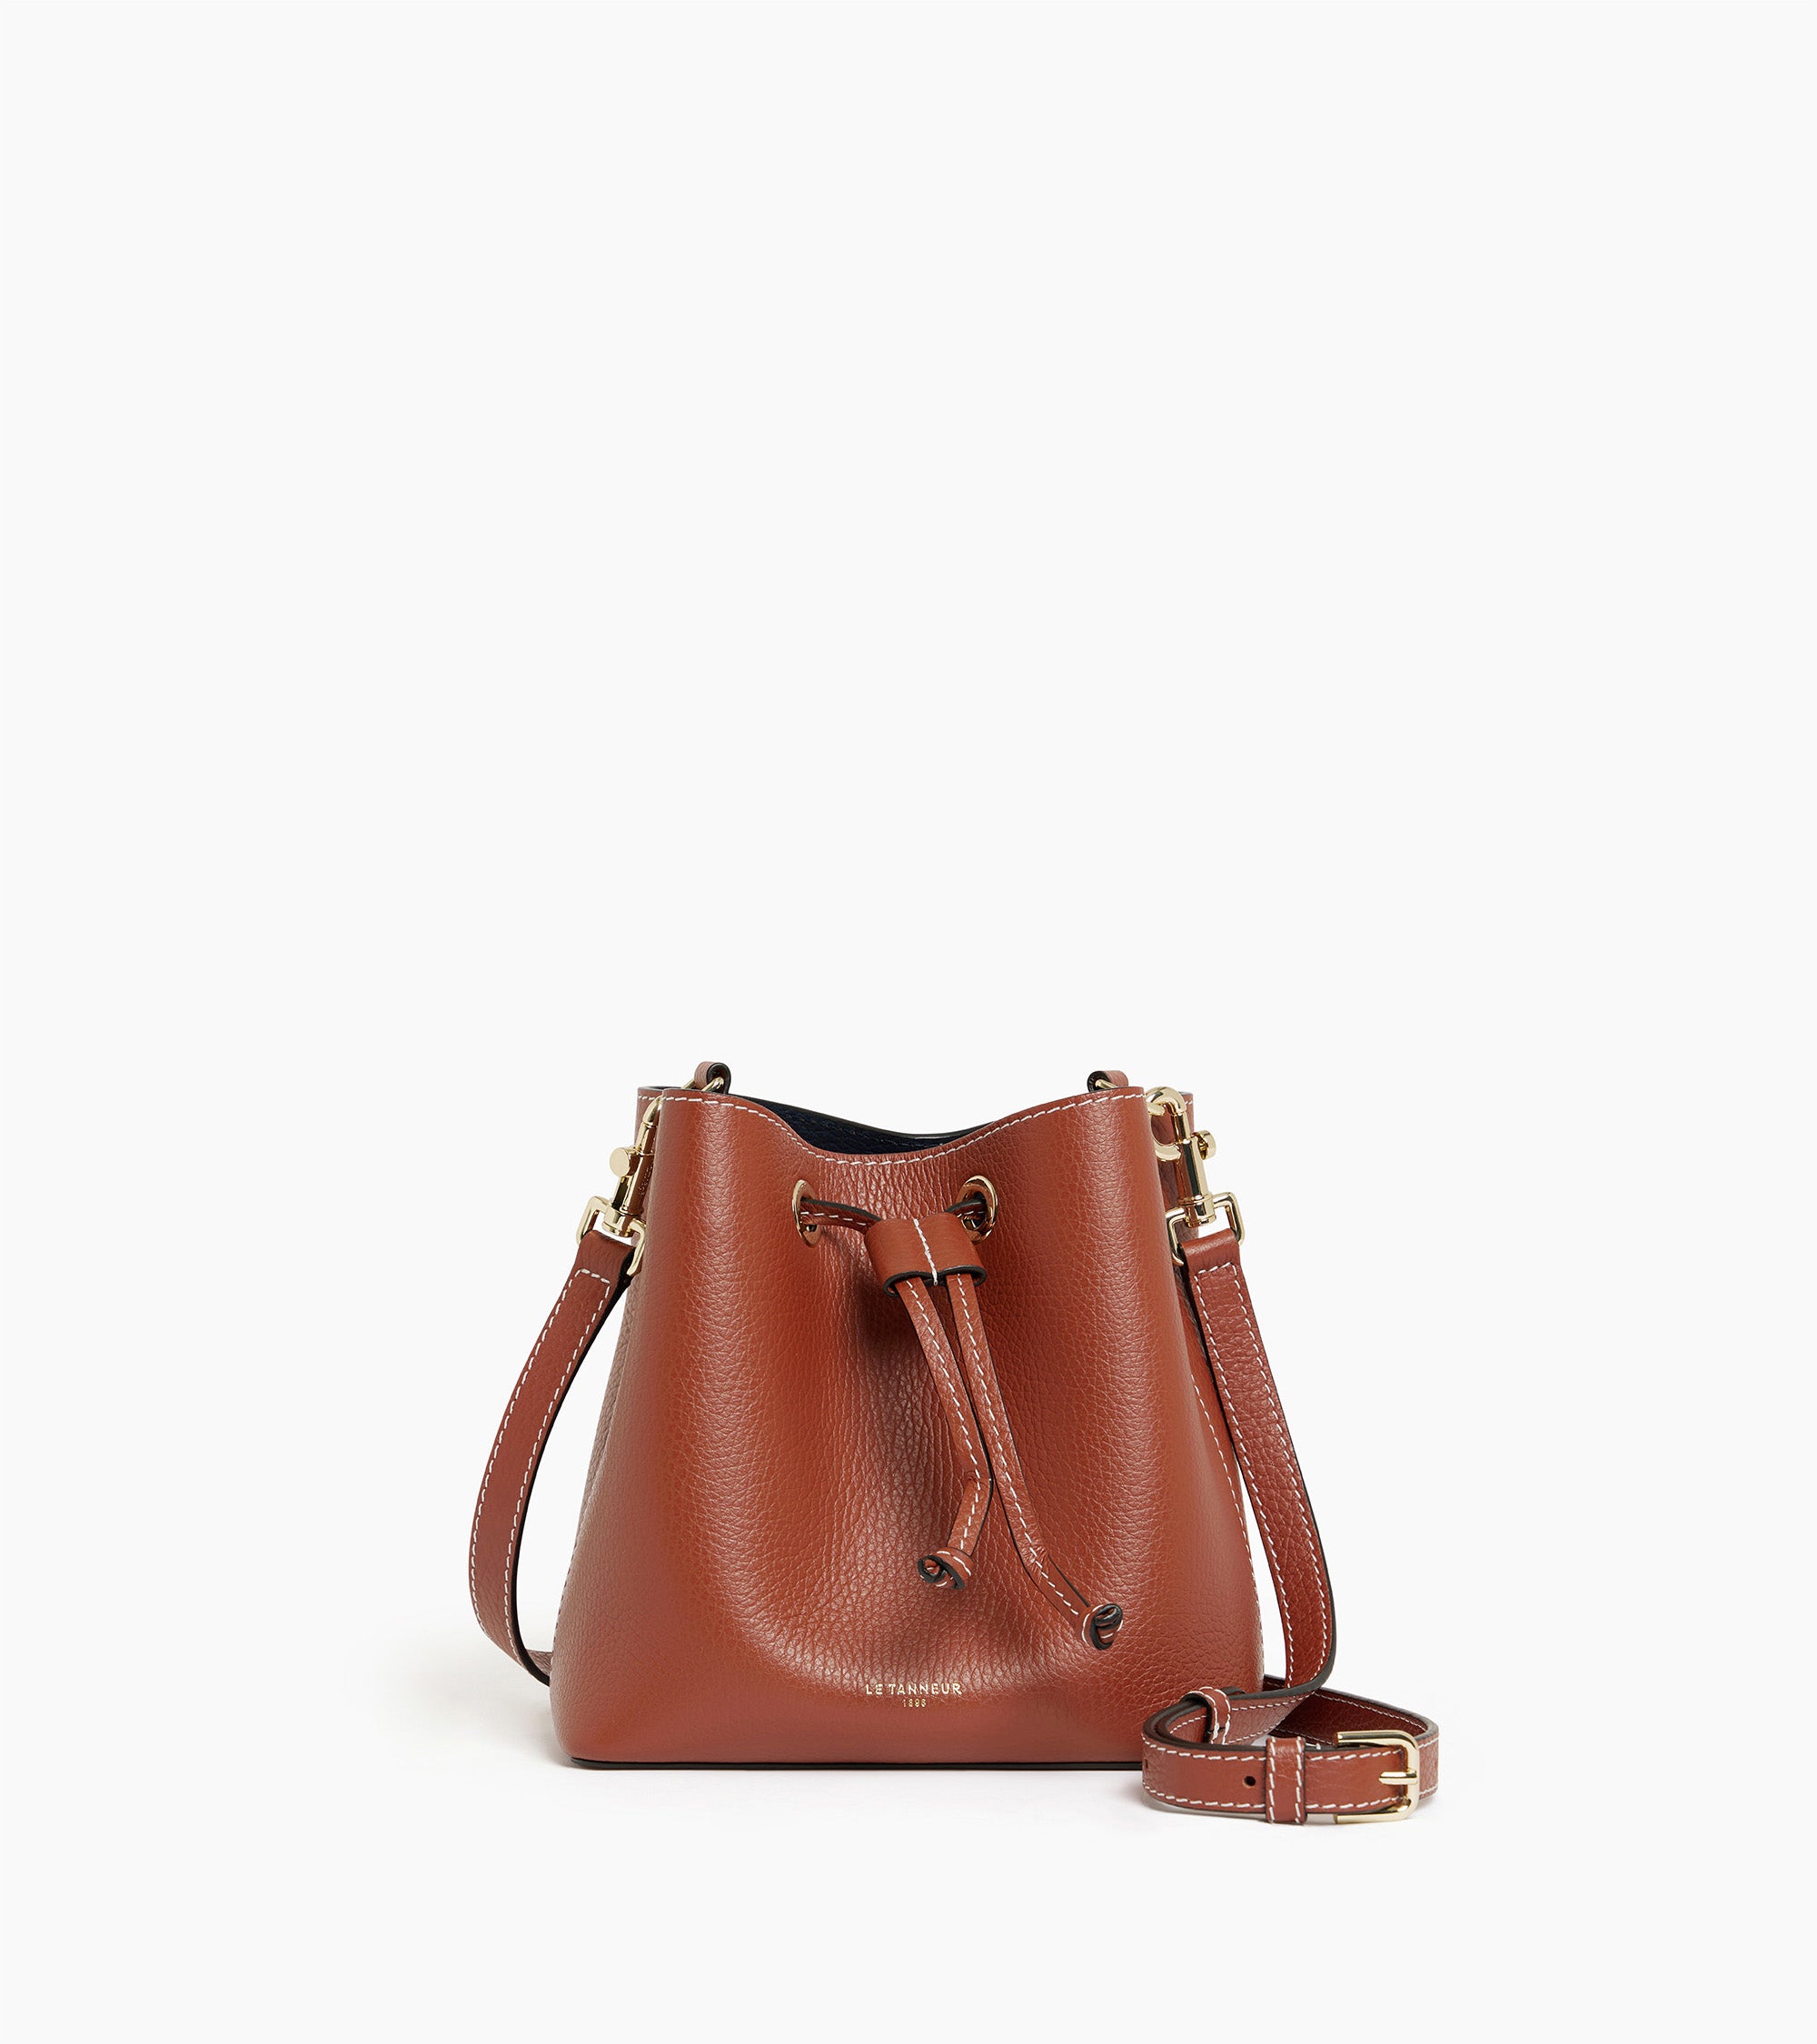 Louise min bucket bag in pebbled leather